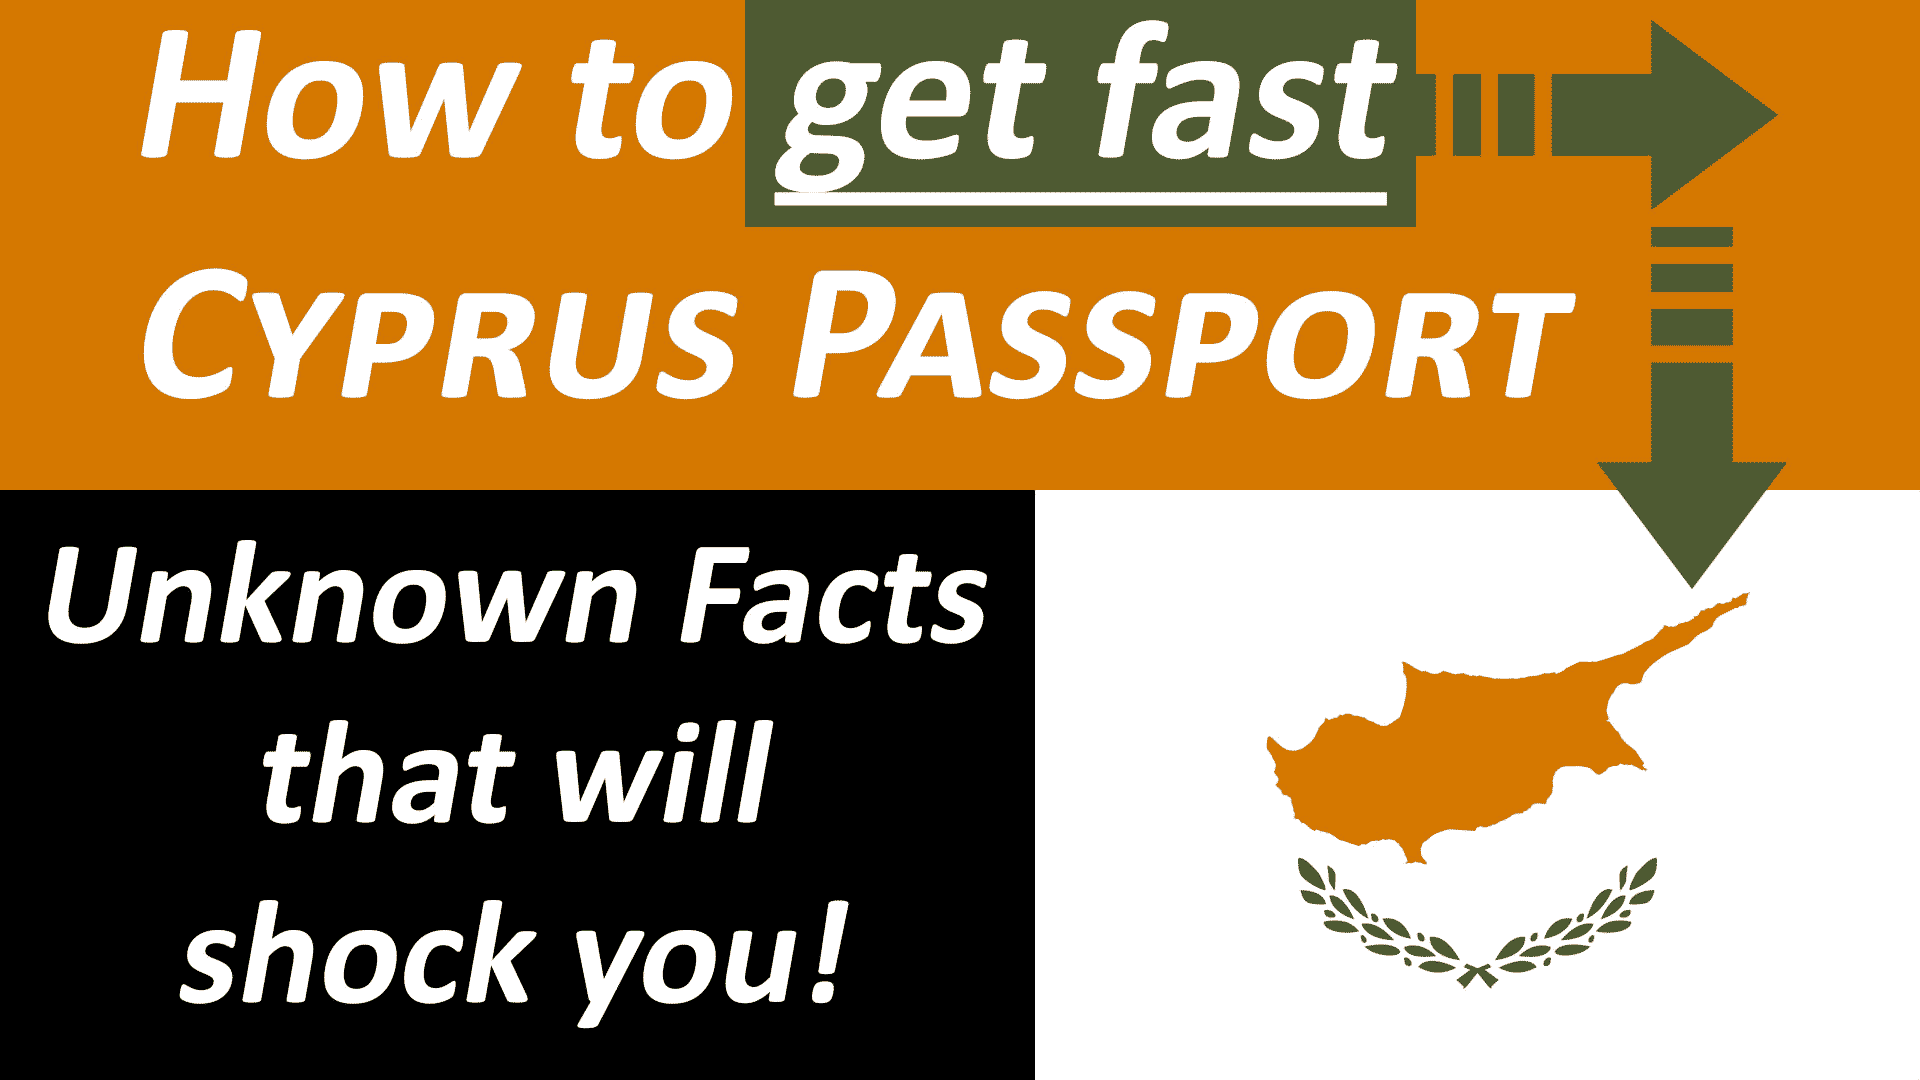 How-to-get-fast-Cyprus-Passport-with-Citizenship-by-Investment-(2018)